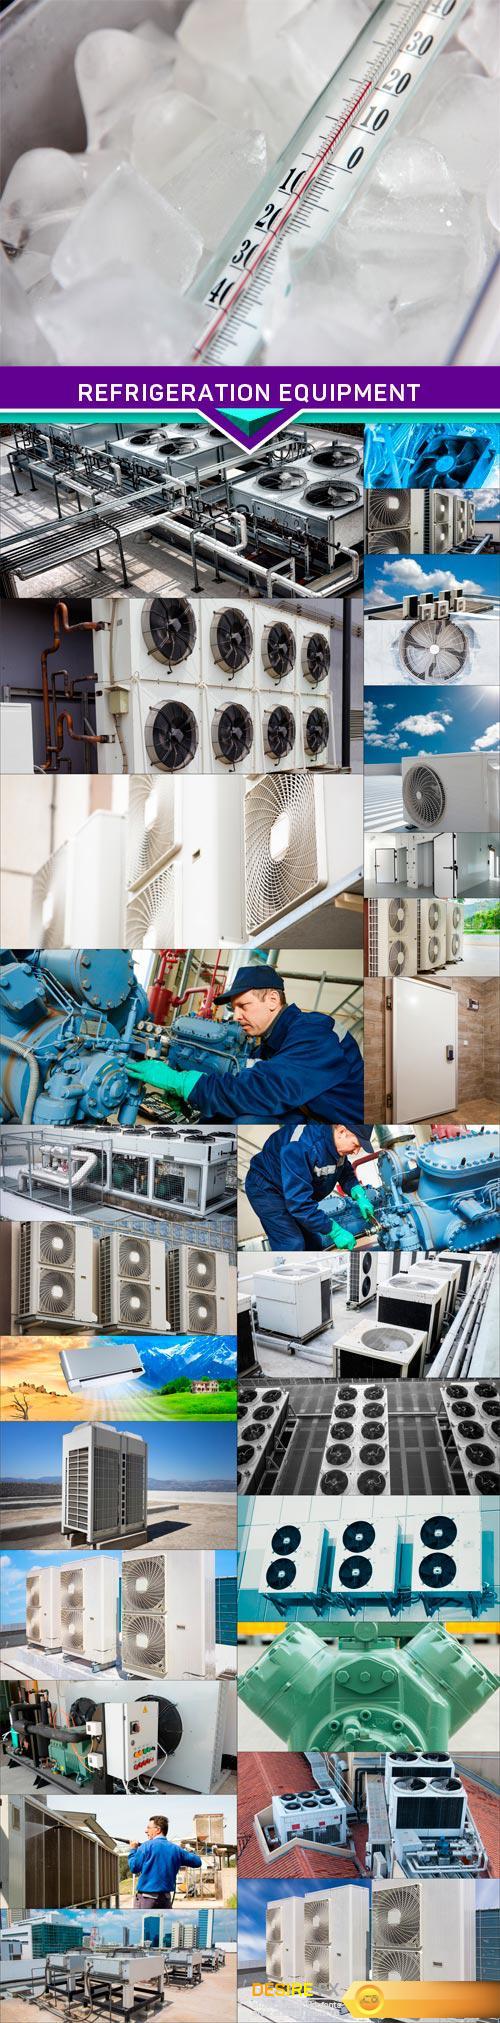 Industrial refrigeration equipment and air conditioning systems 28X JPEG